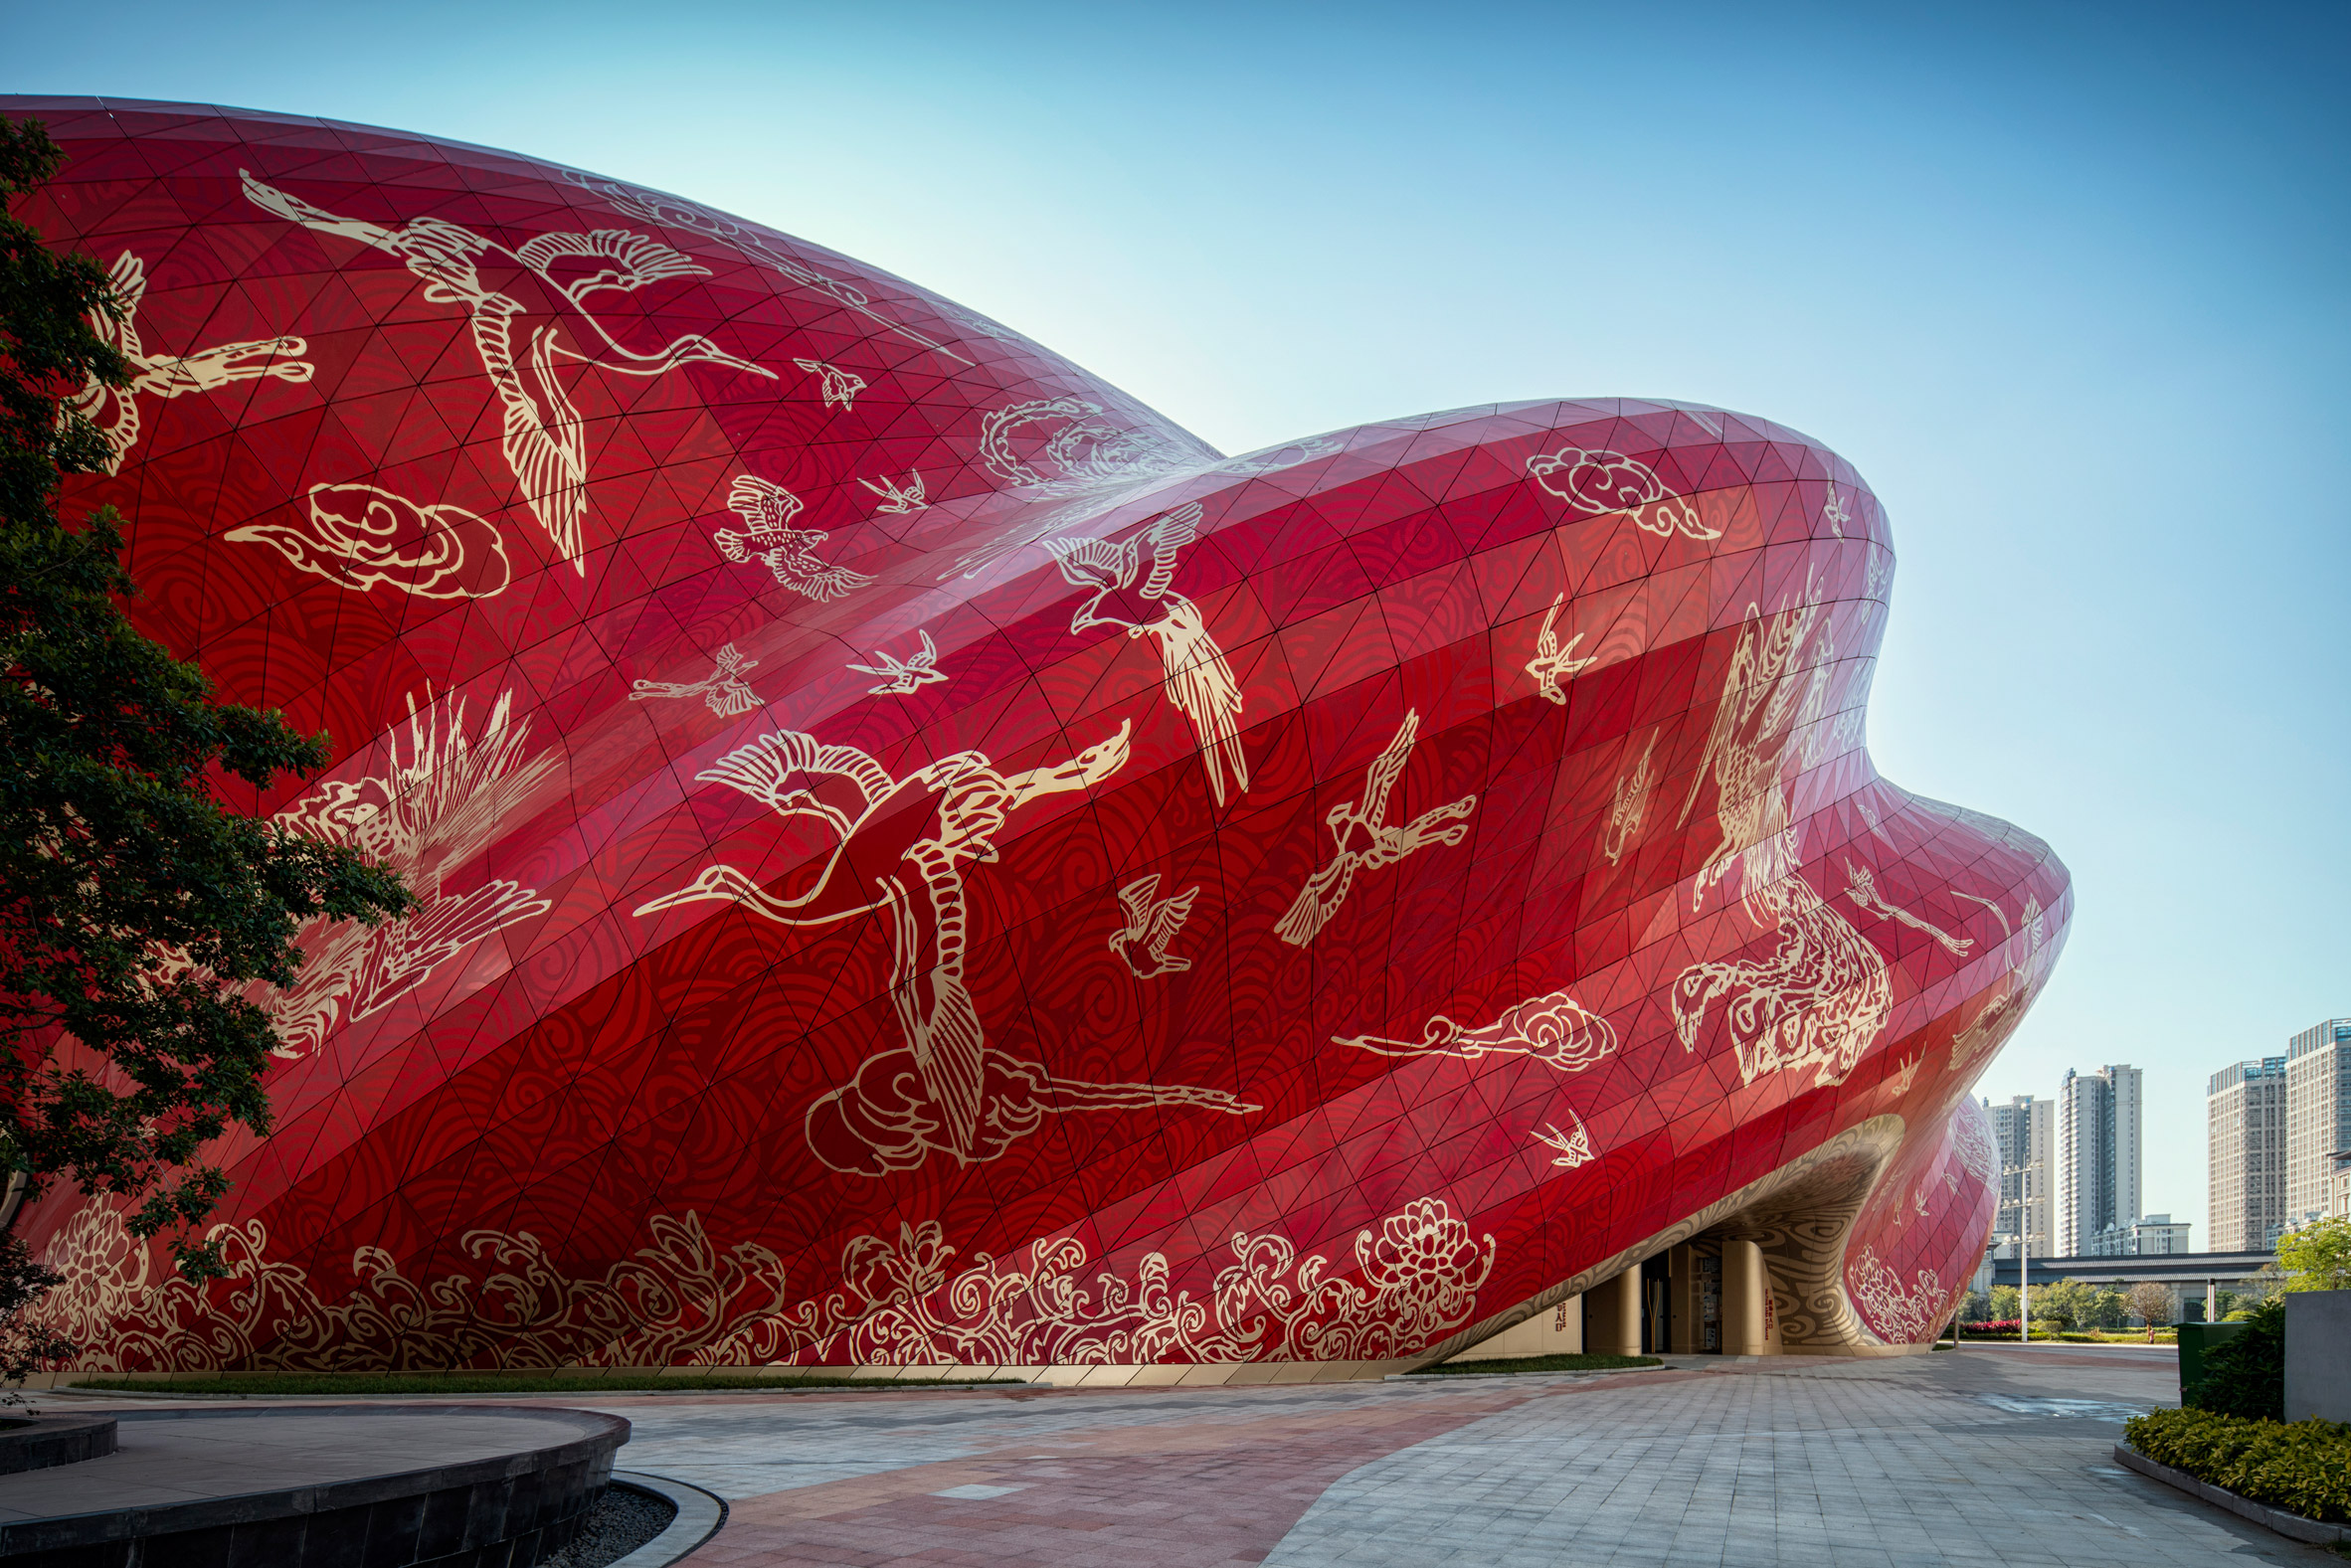 Red-clad theatre in the Guangzhou